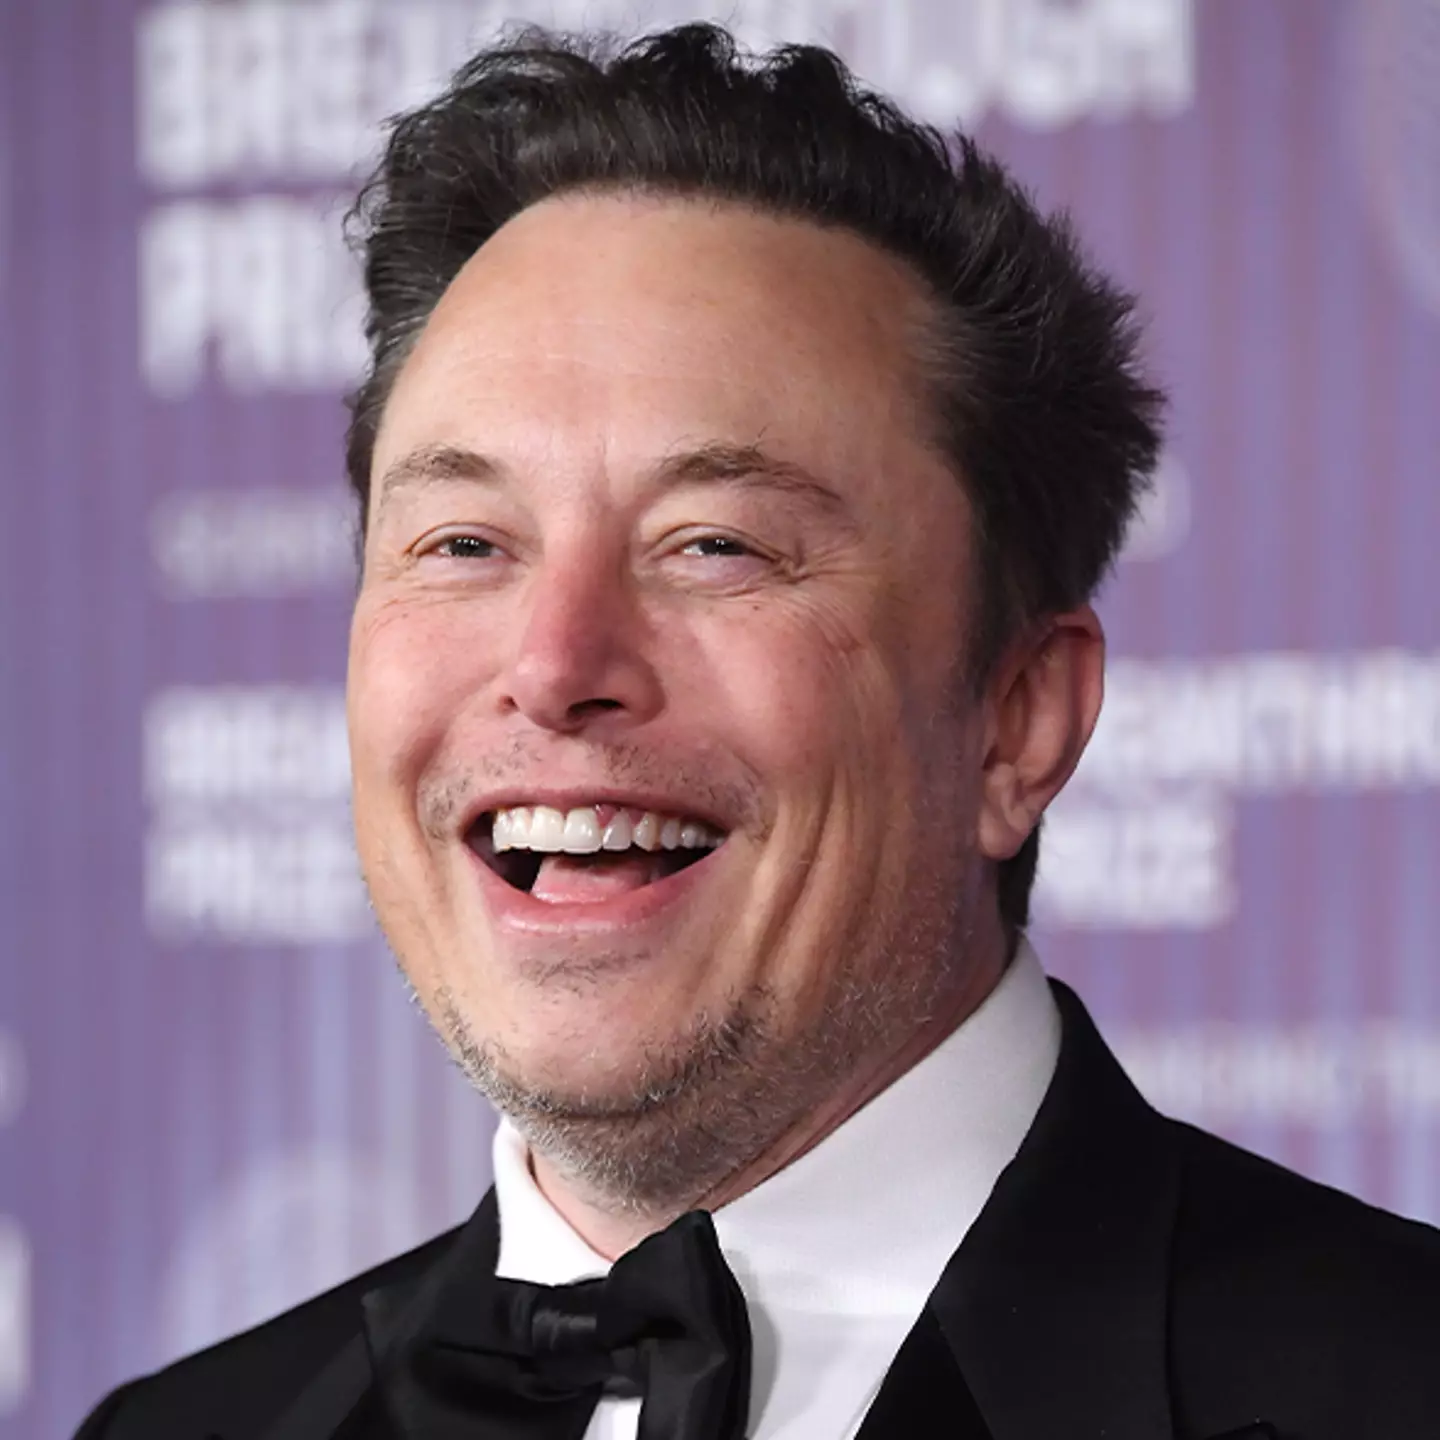 Eerie reason why Elon Musk hopes that we are living in a simulation